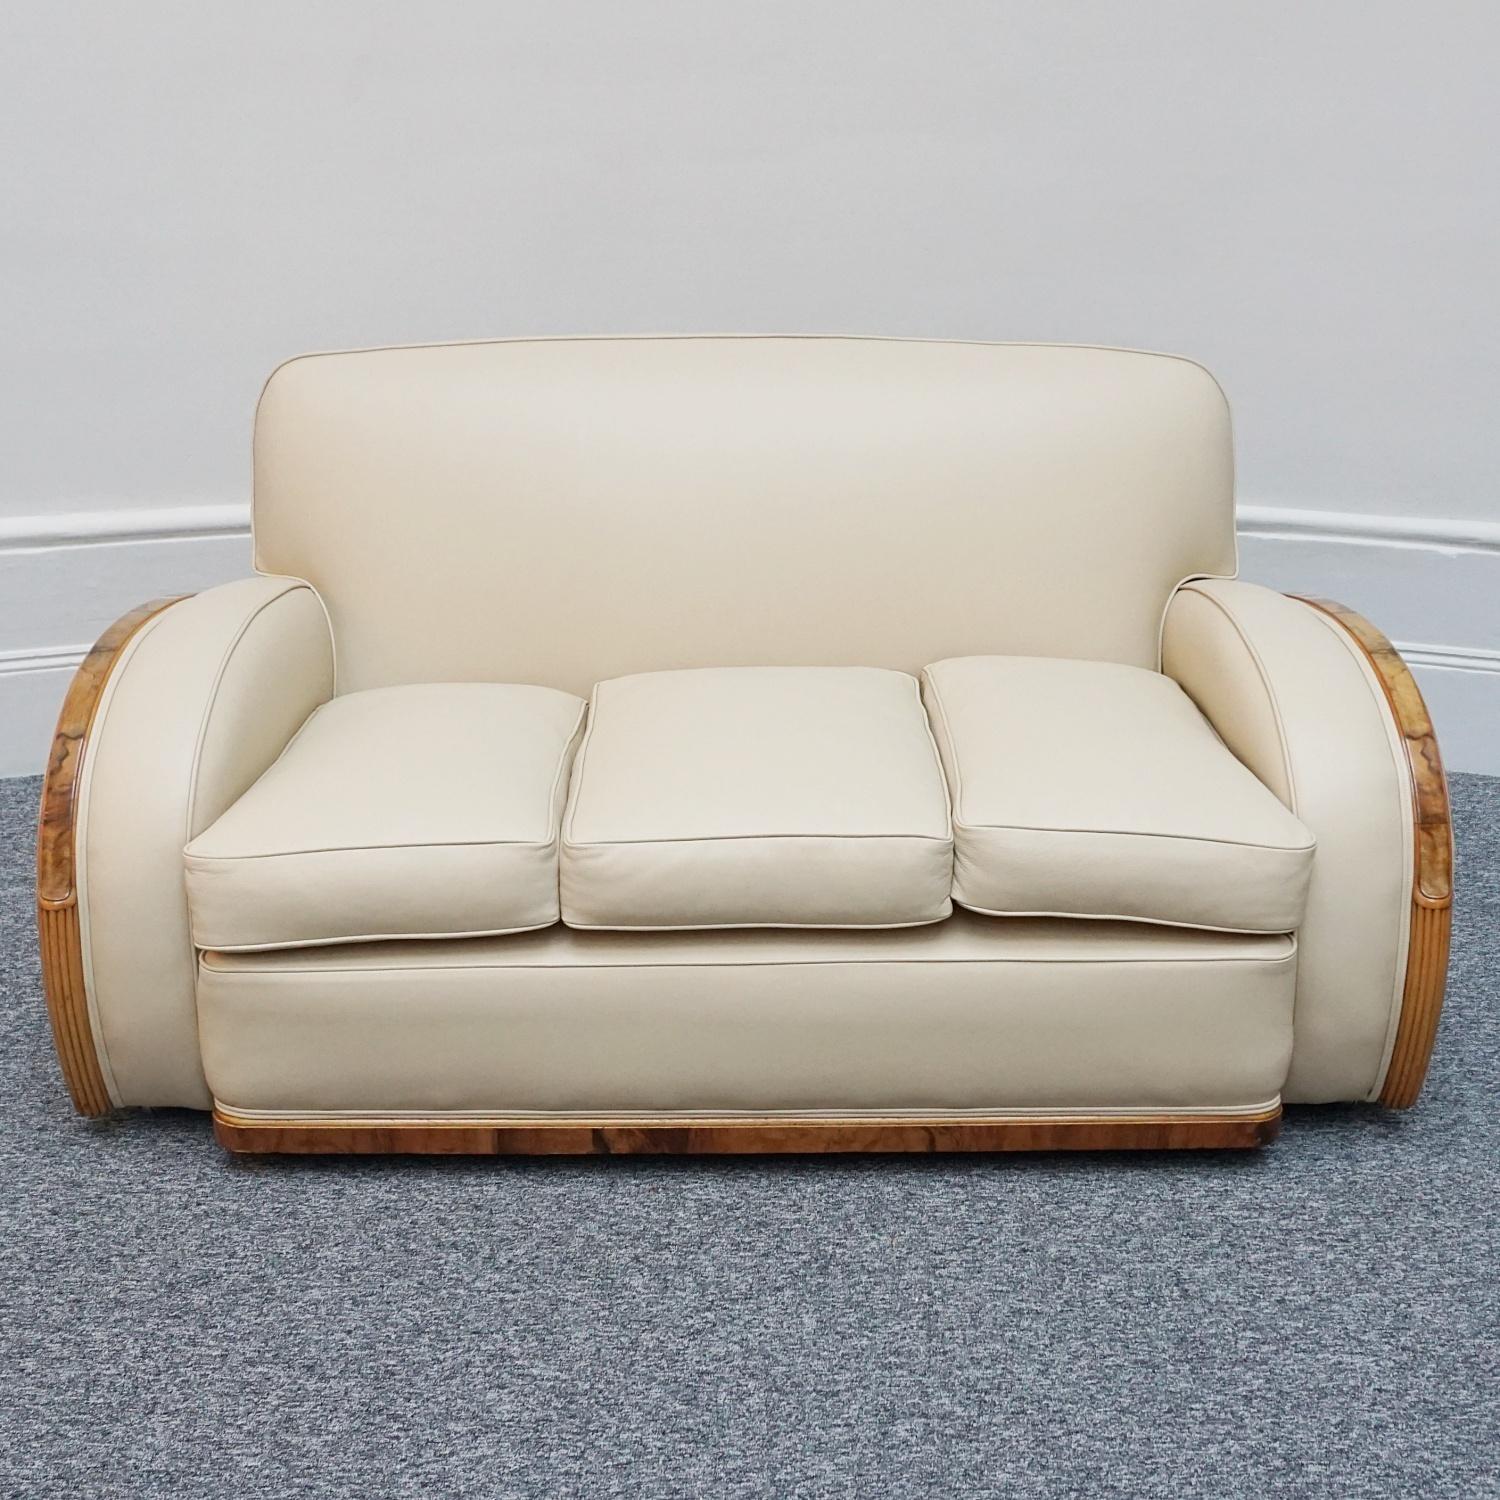 An Art Deco Tank Sofa by Heal's of London. Burr and solid walnut banding with reeded lower section. Re-upholstered in cream leather and contrasting faux suede. 

Dimensions: Sofa H 80cm W 163cm D 74cm Seat H 49cm

Origin: English

Date: Circa 1935